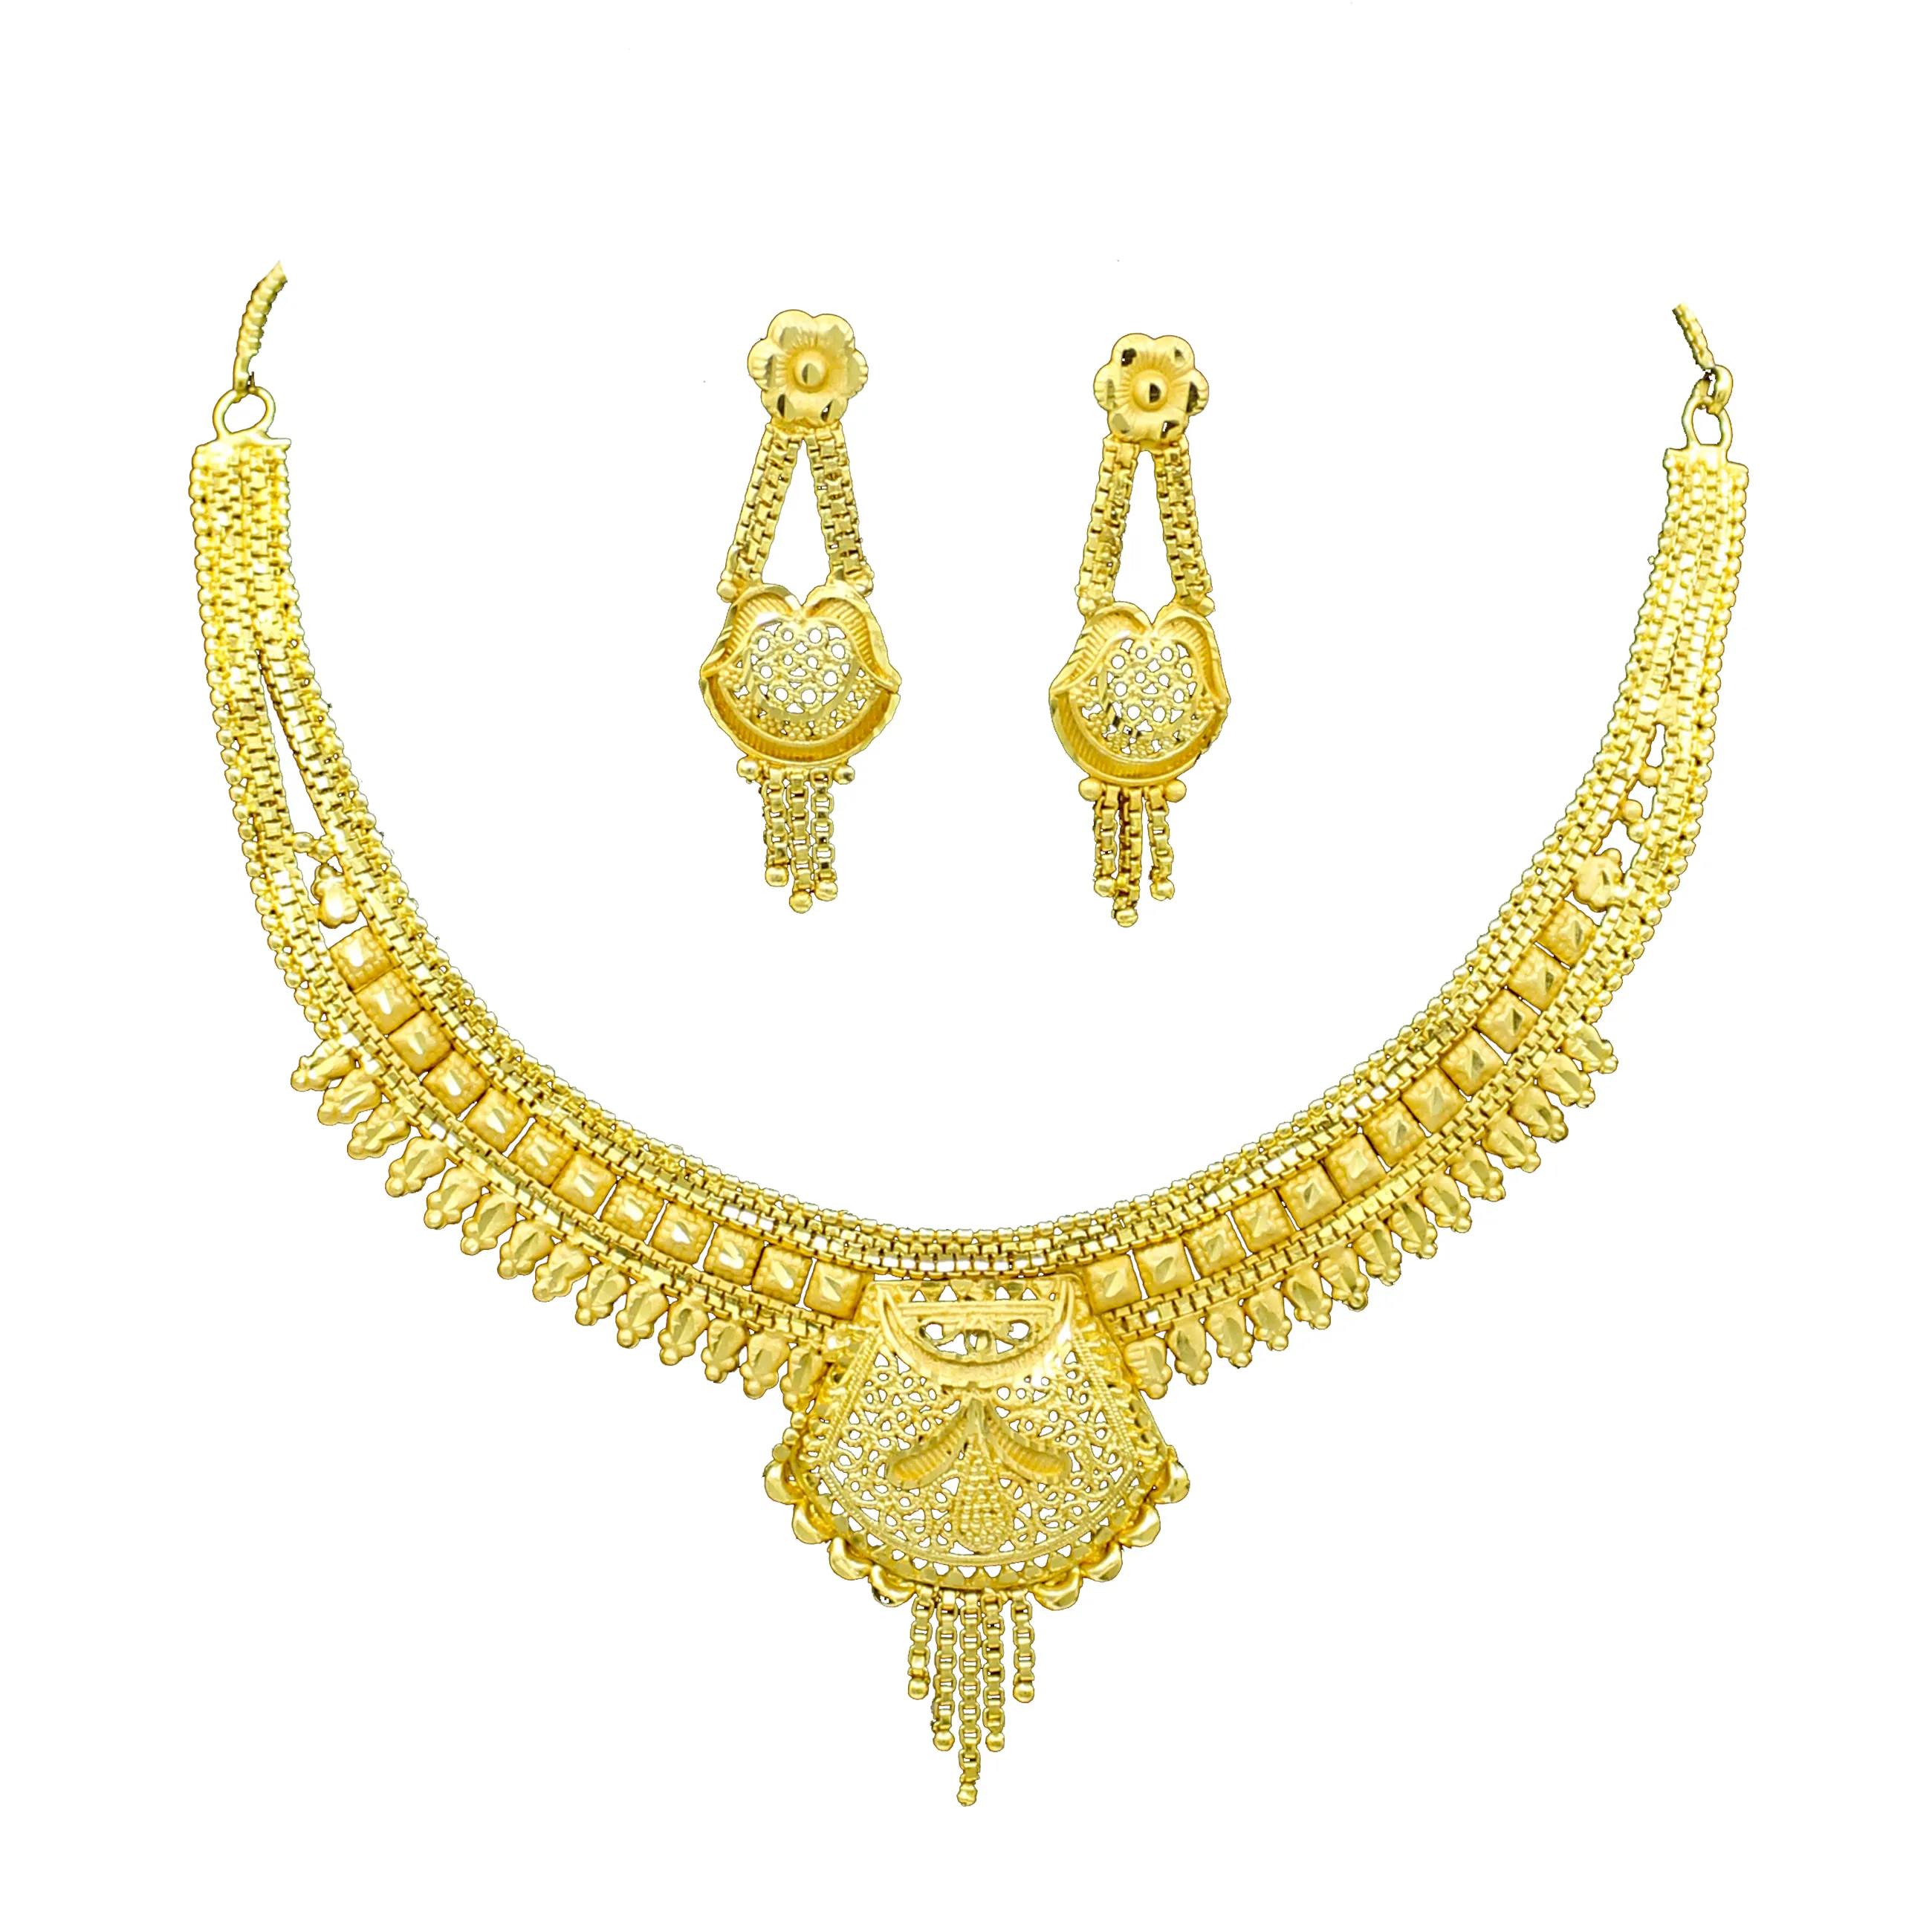 Alex Jewellery - " Traditional One Gram Gold Plated Forming Golden Choker Necklace/Jewelry Set "